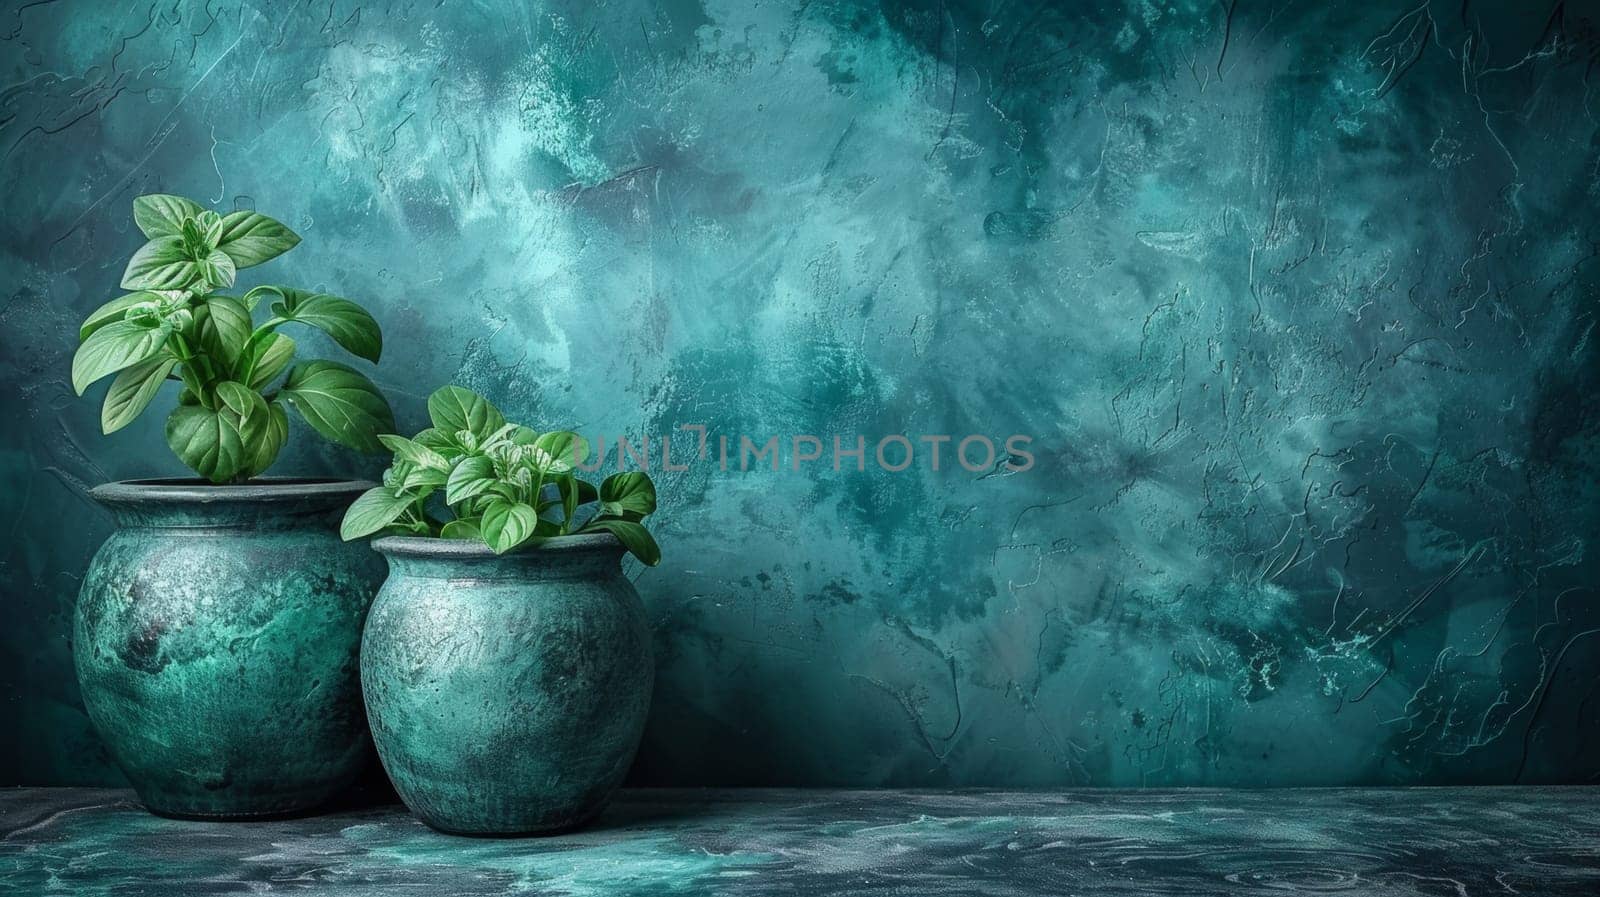 Two green vases with plants in them sitting on a table